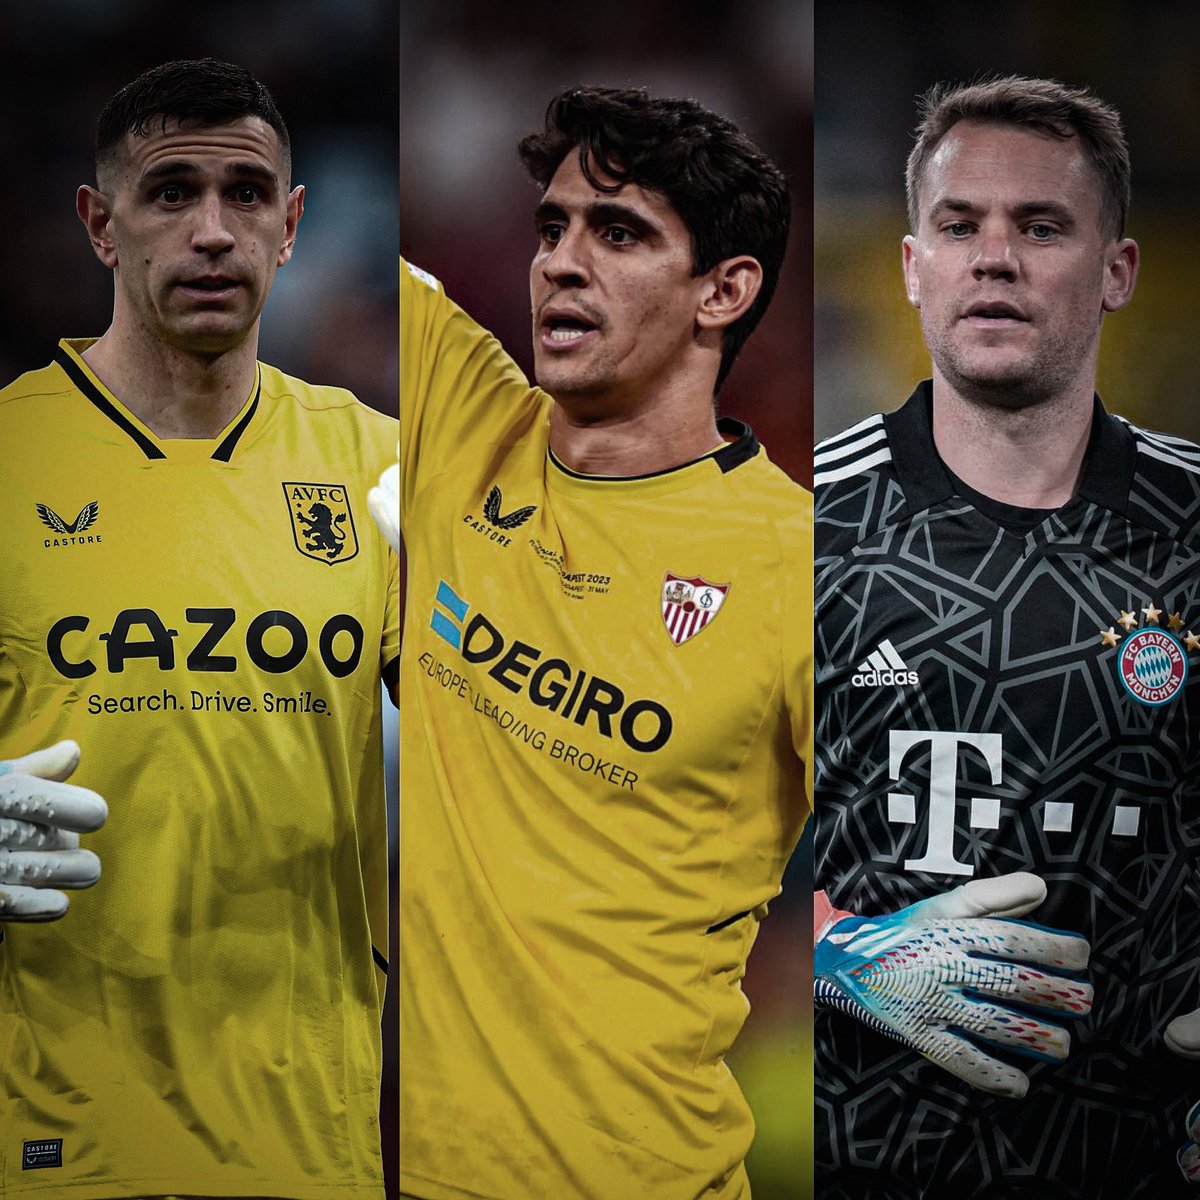 Chelsea’s GK should be either:

• Martinez🇦🇷 - Great shot stopper, leader, has personality — 30 yrs old

• Bounou🇲🇦 - Great reflexes, consistent, good on pens — 32 yrs old

• Neuer🇩🇪 - Rogue & unlikely, but he’s still class  — 37 yrs old

They all pave the way for Slonina